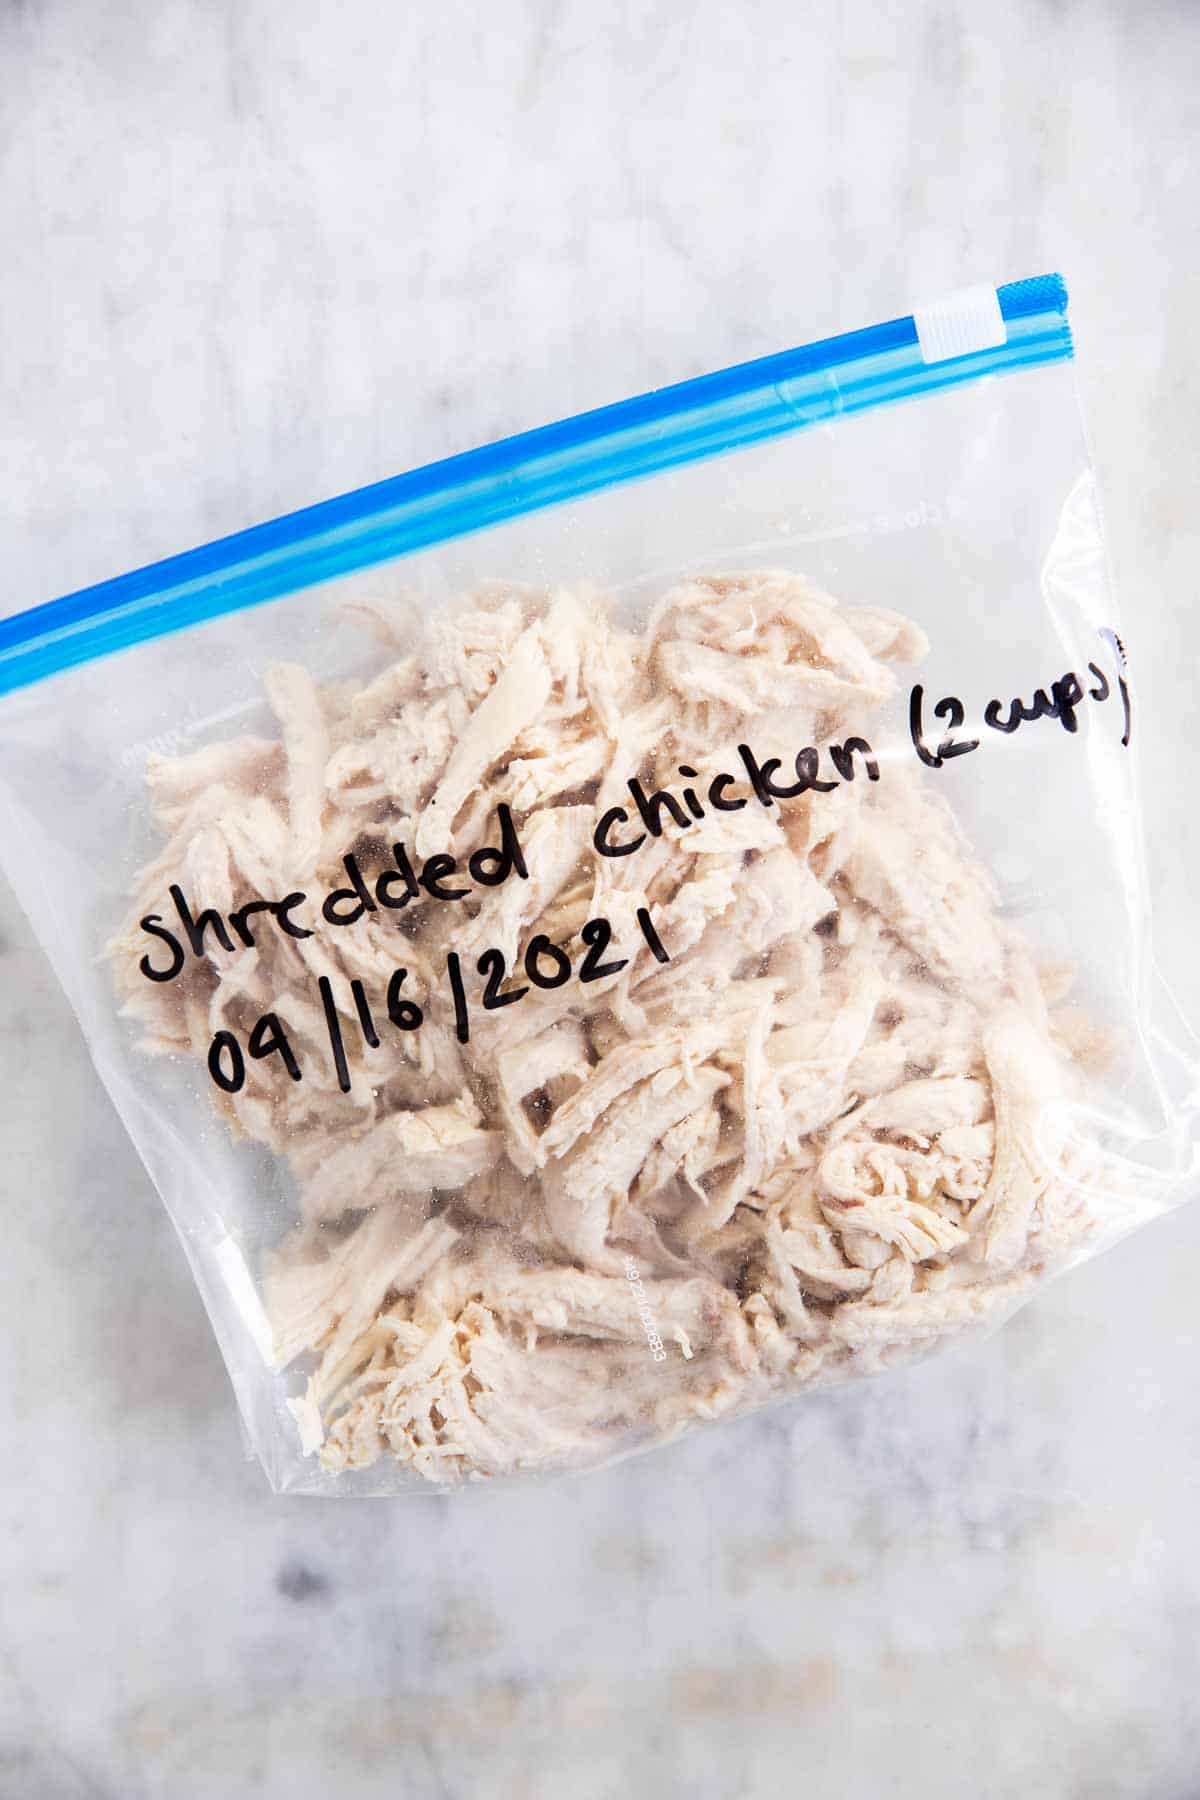 freezer bag filled with shredded chicken on marble surface